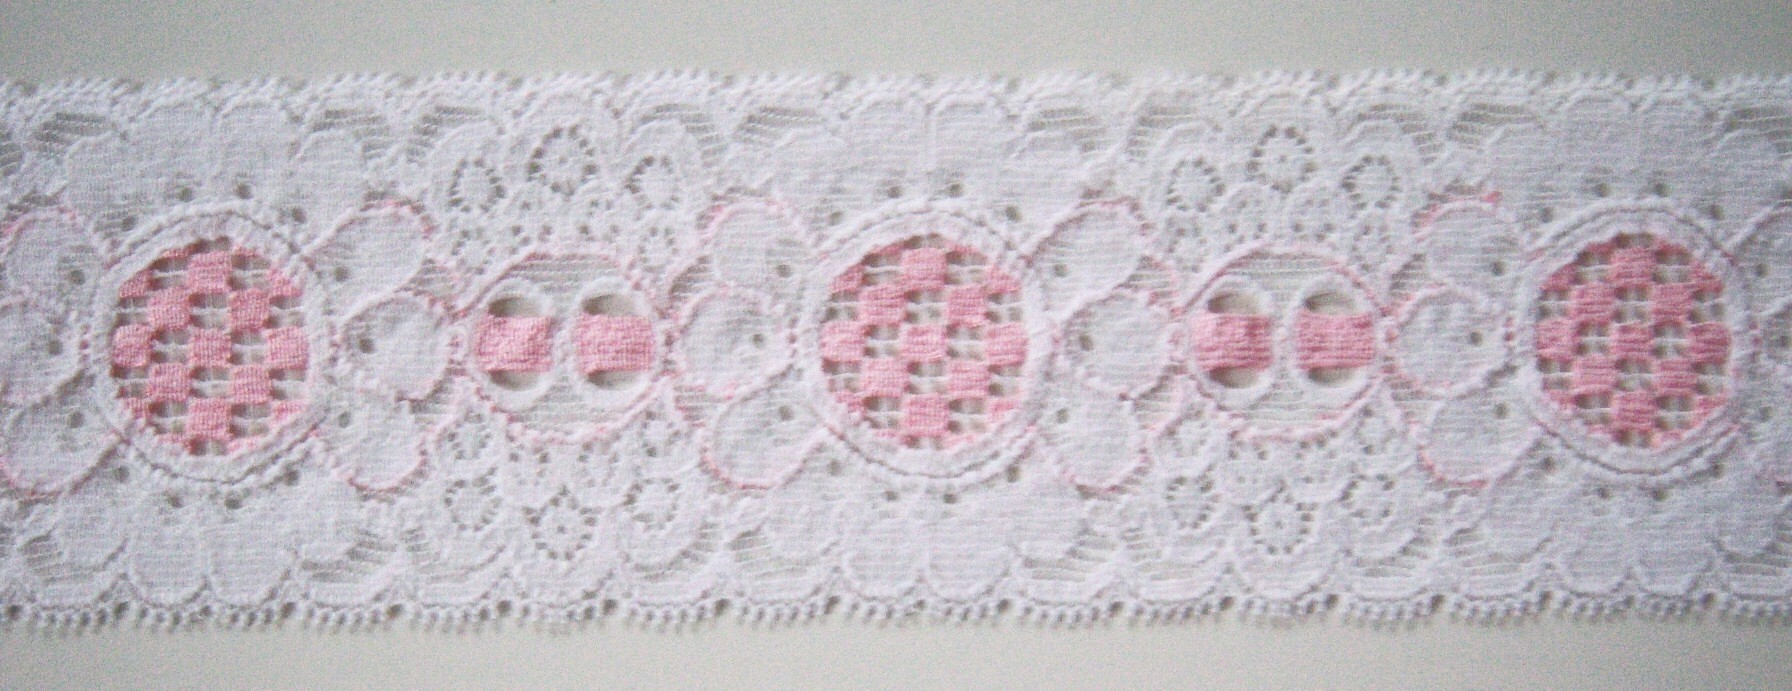 White/Pink 2 3/4" Stretch Lace